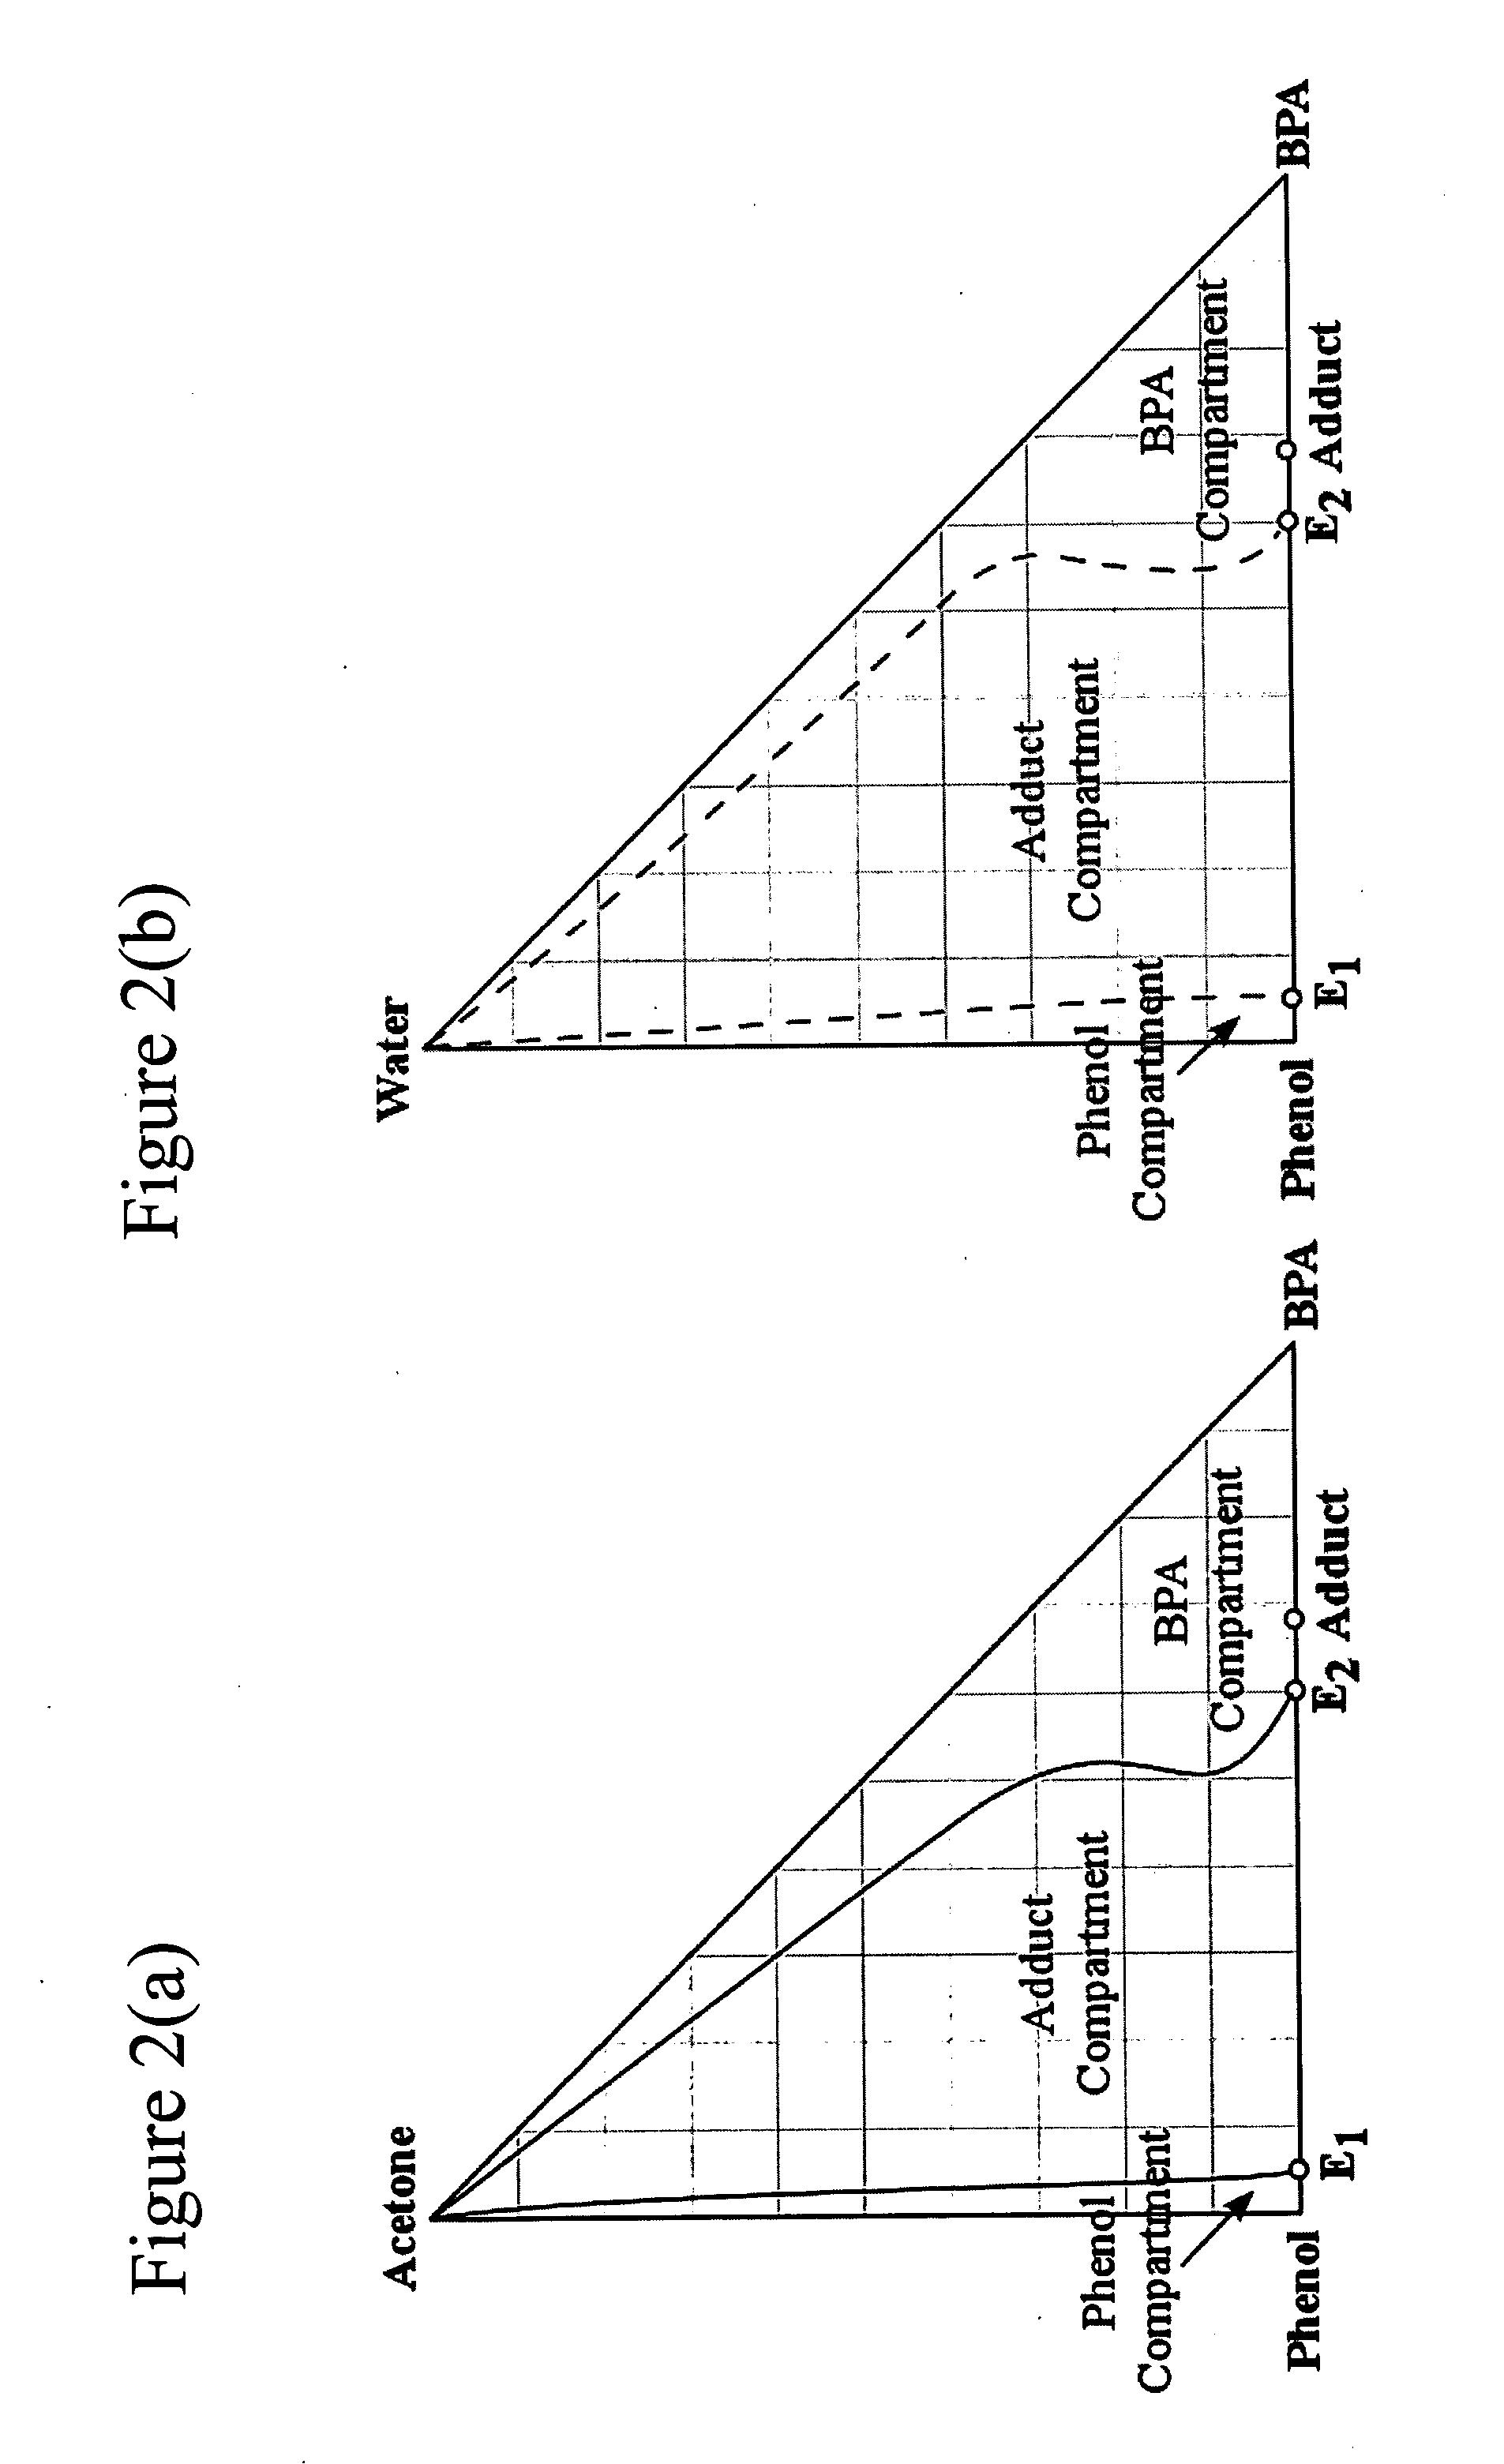 System and method of producing bisphenol-A (BPA) using two stage crystallization